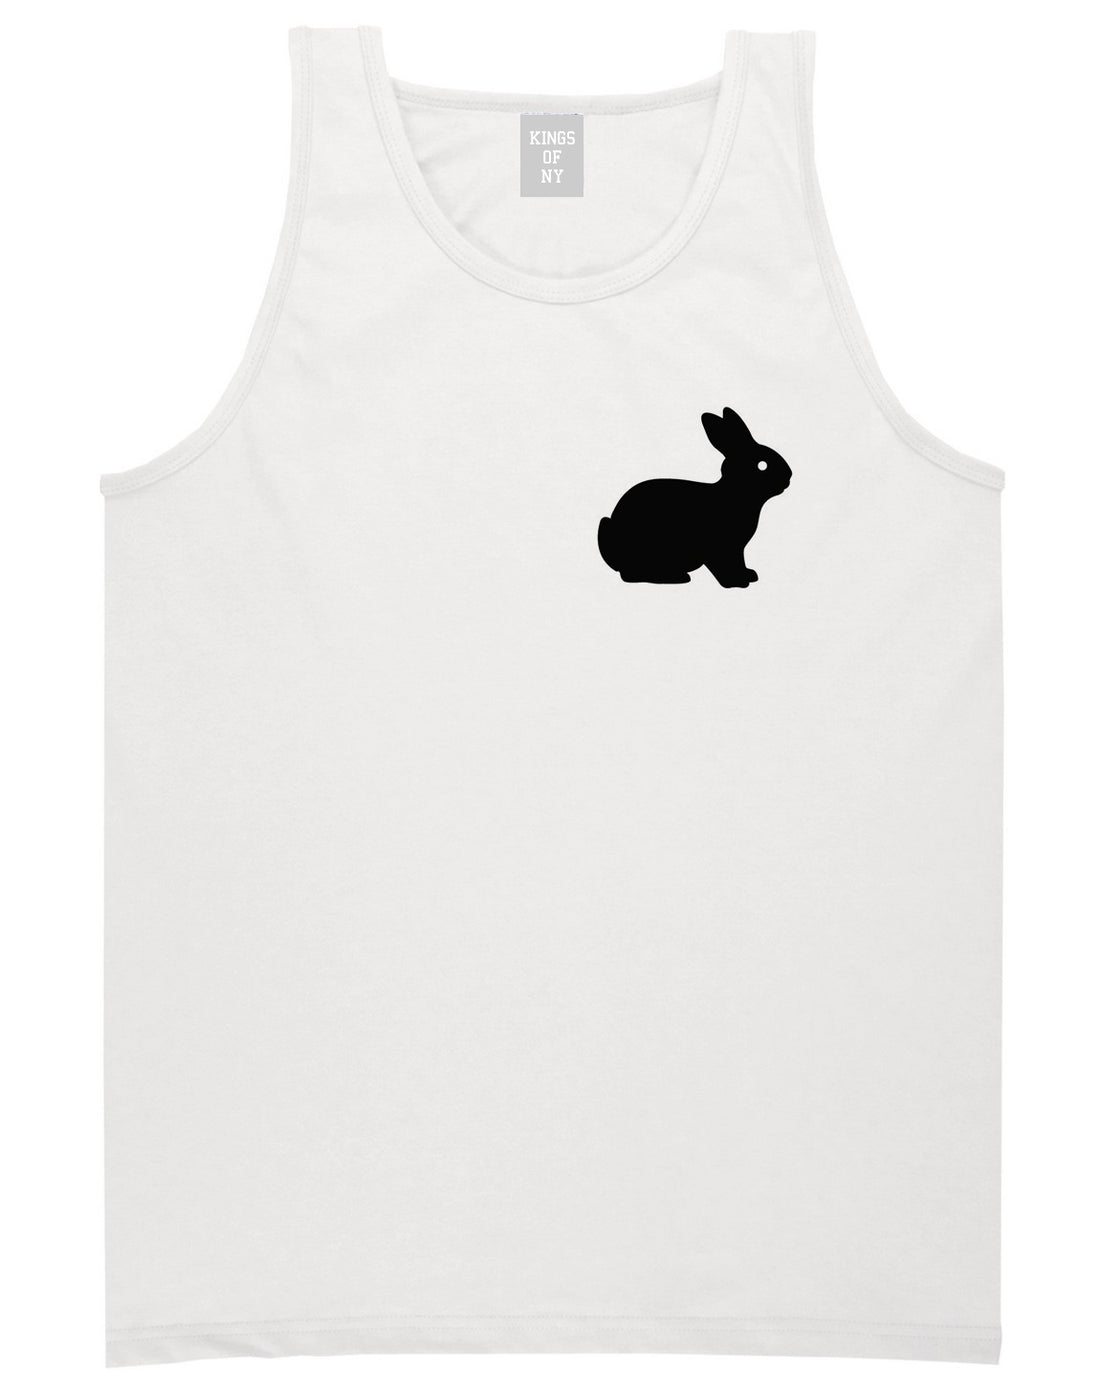 Bunny Rabbit Easter Chest White Tank Top Shirt by Kings Of NY